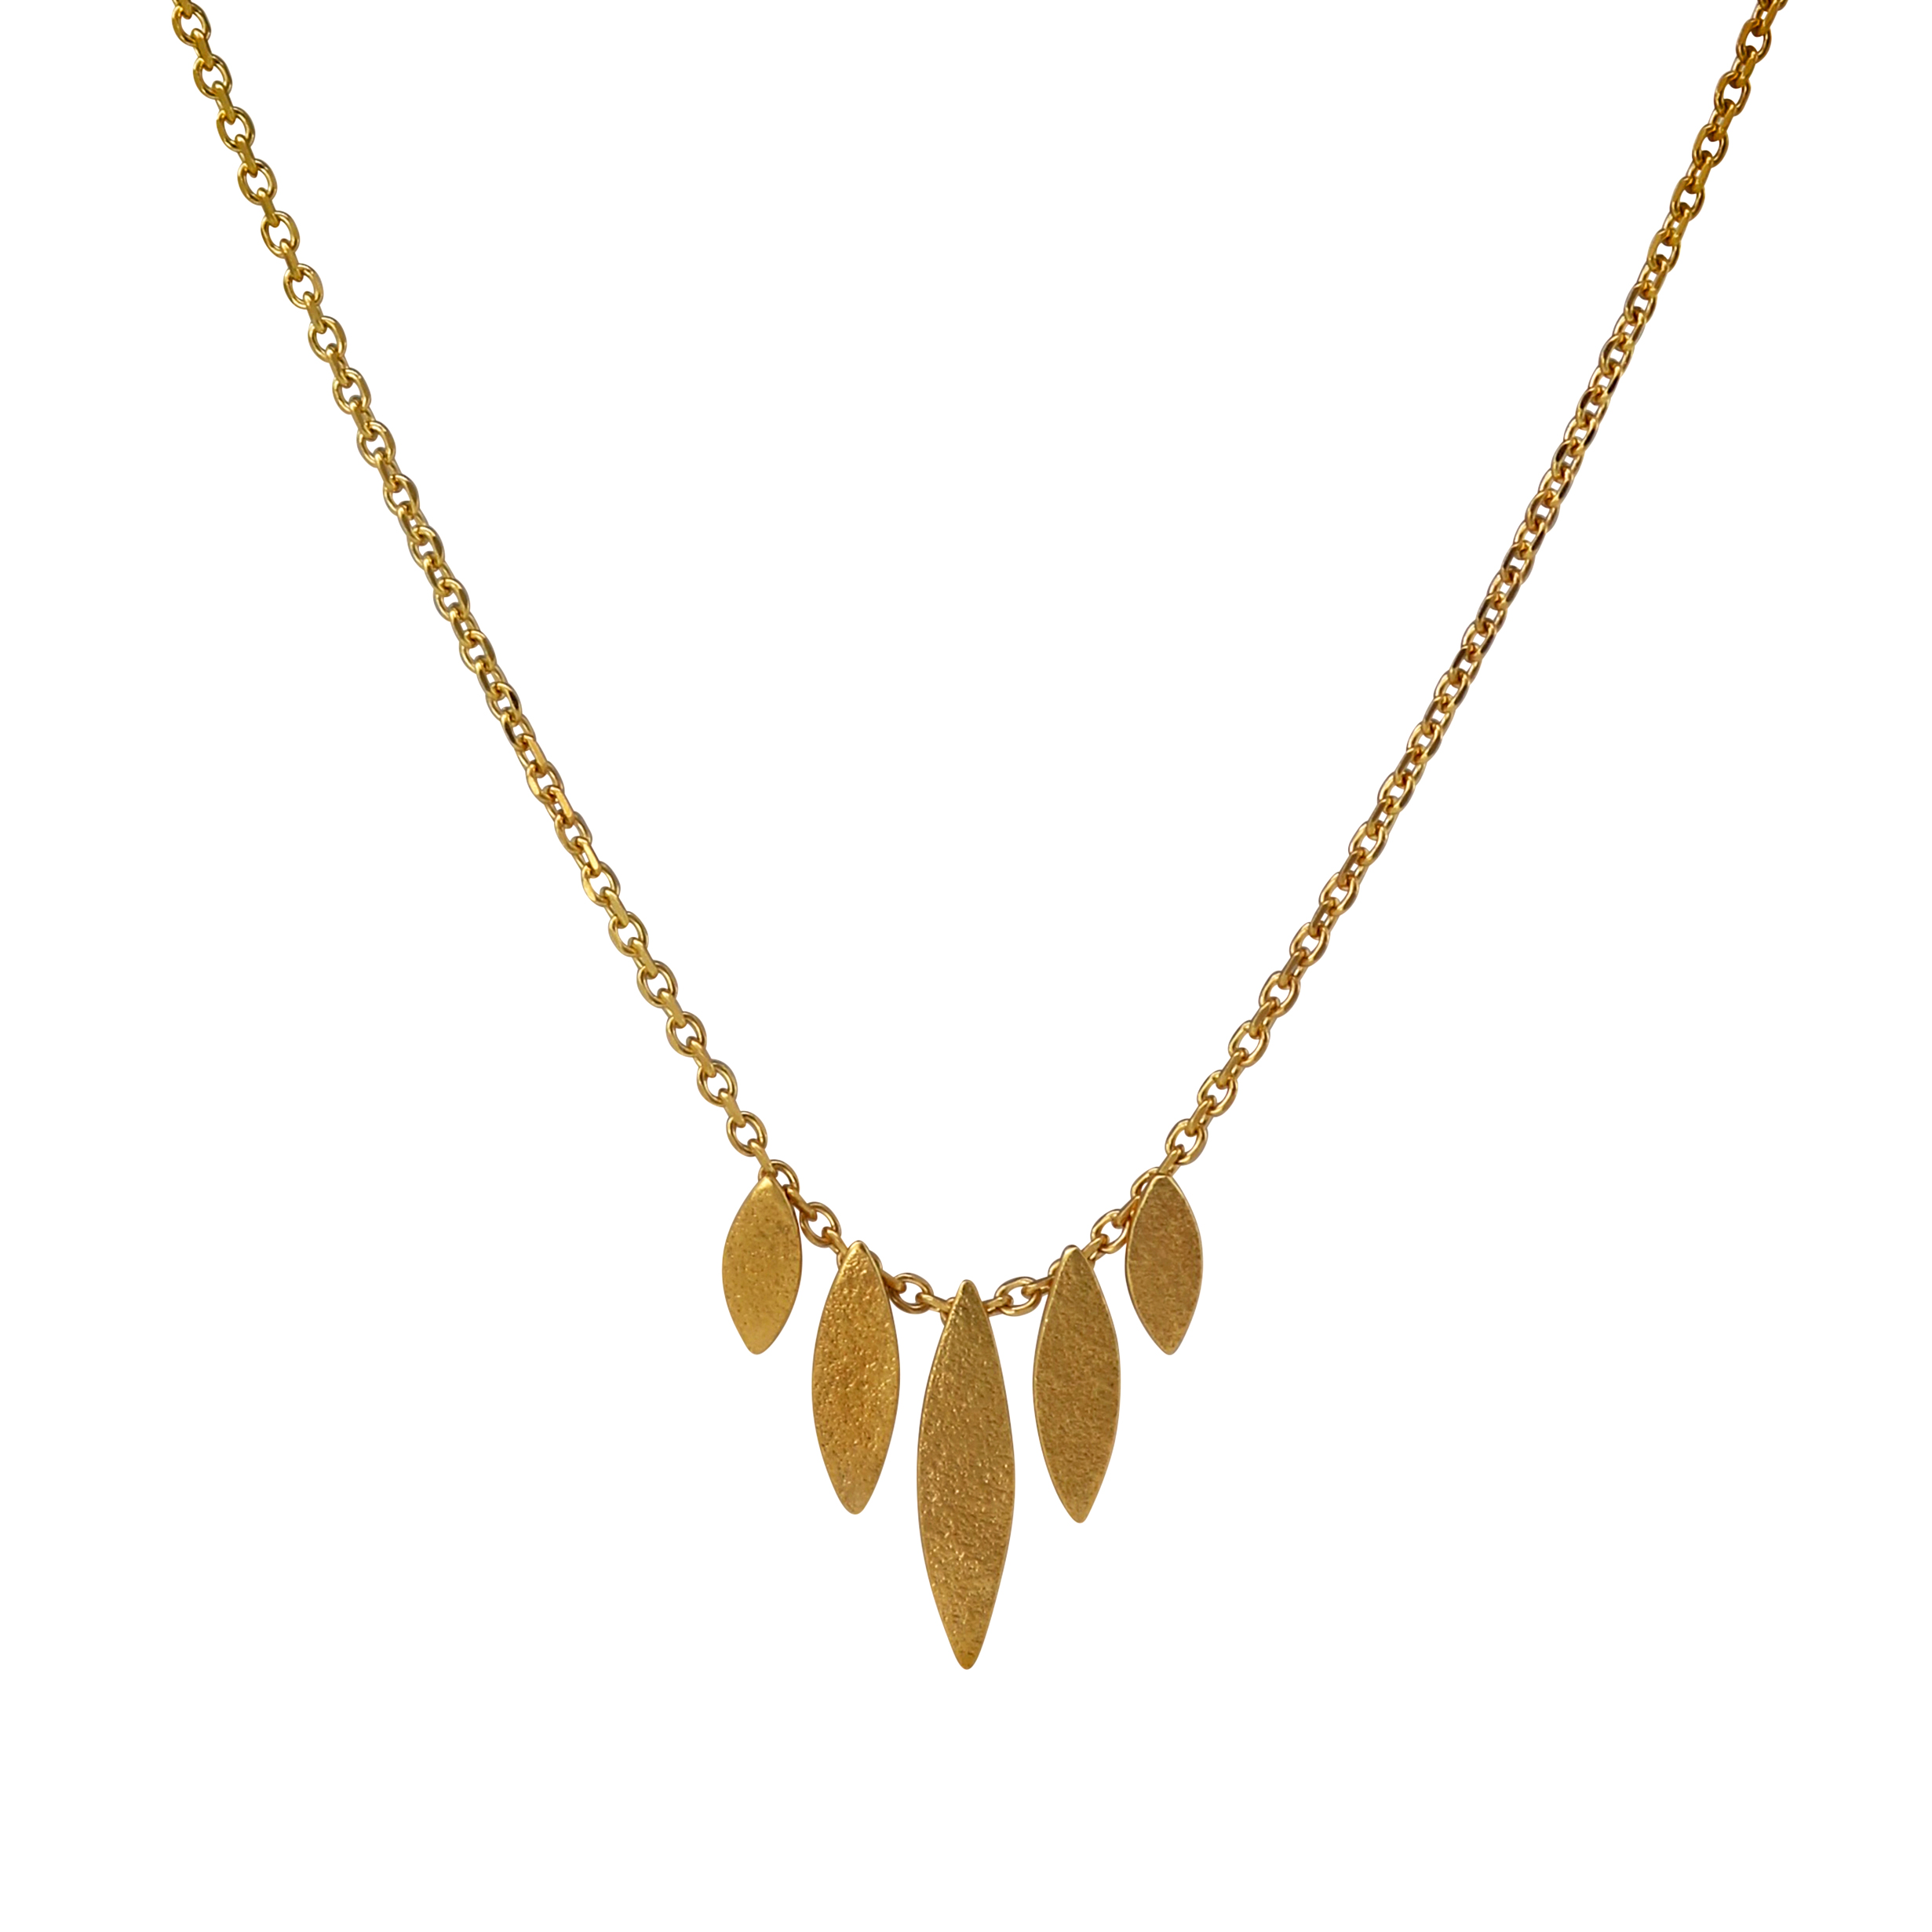 graduated necklace gold